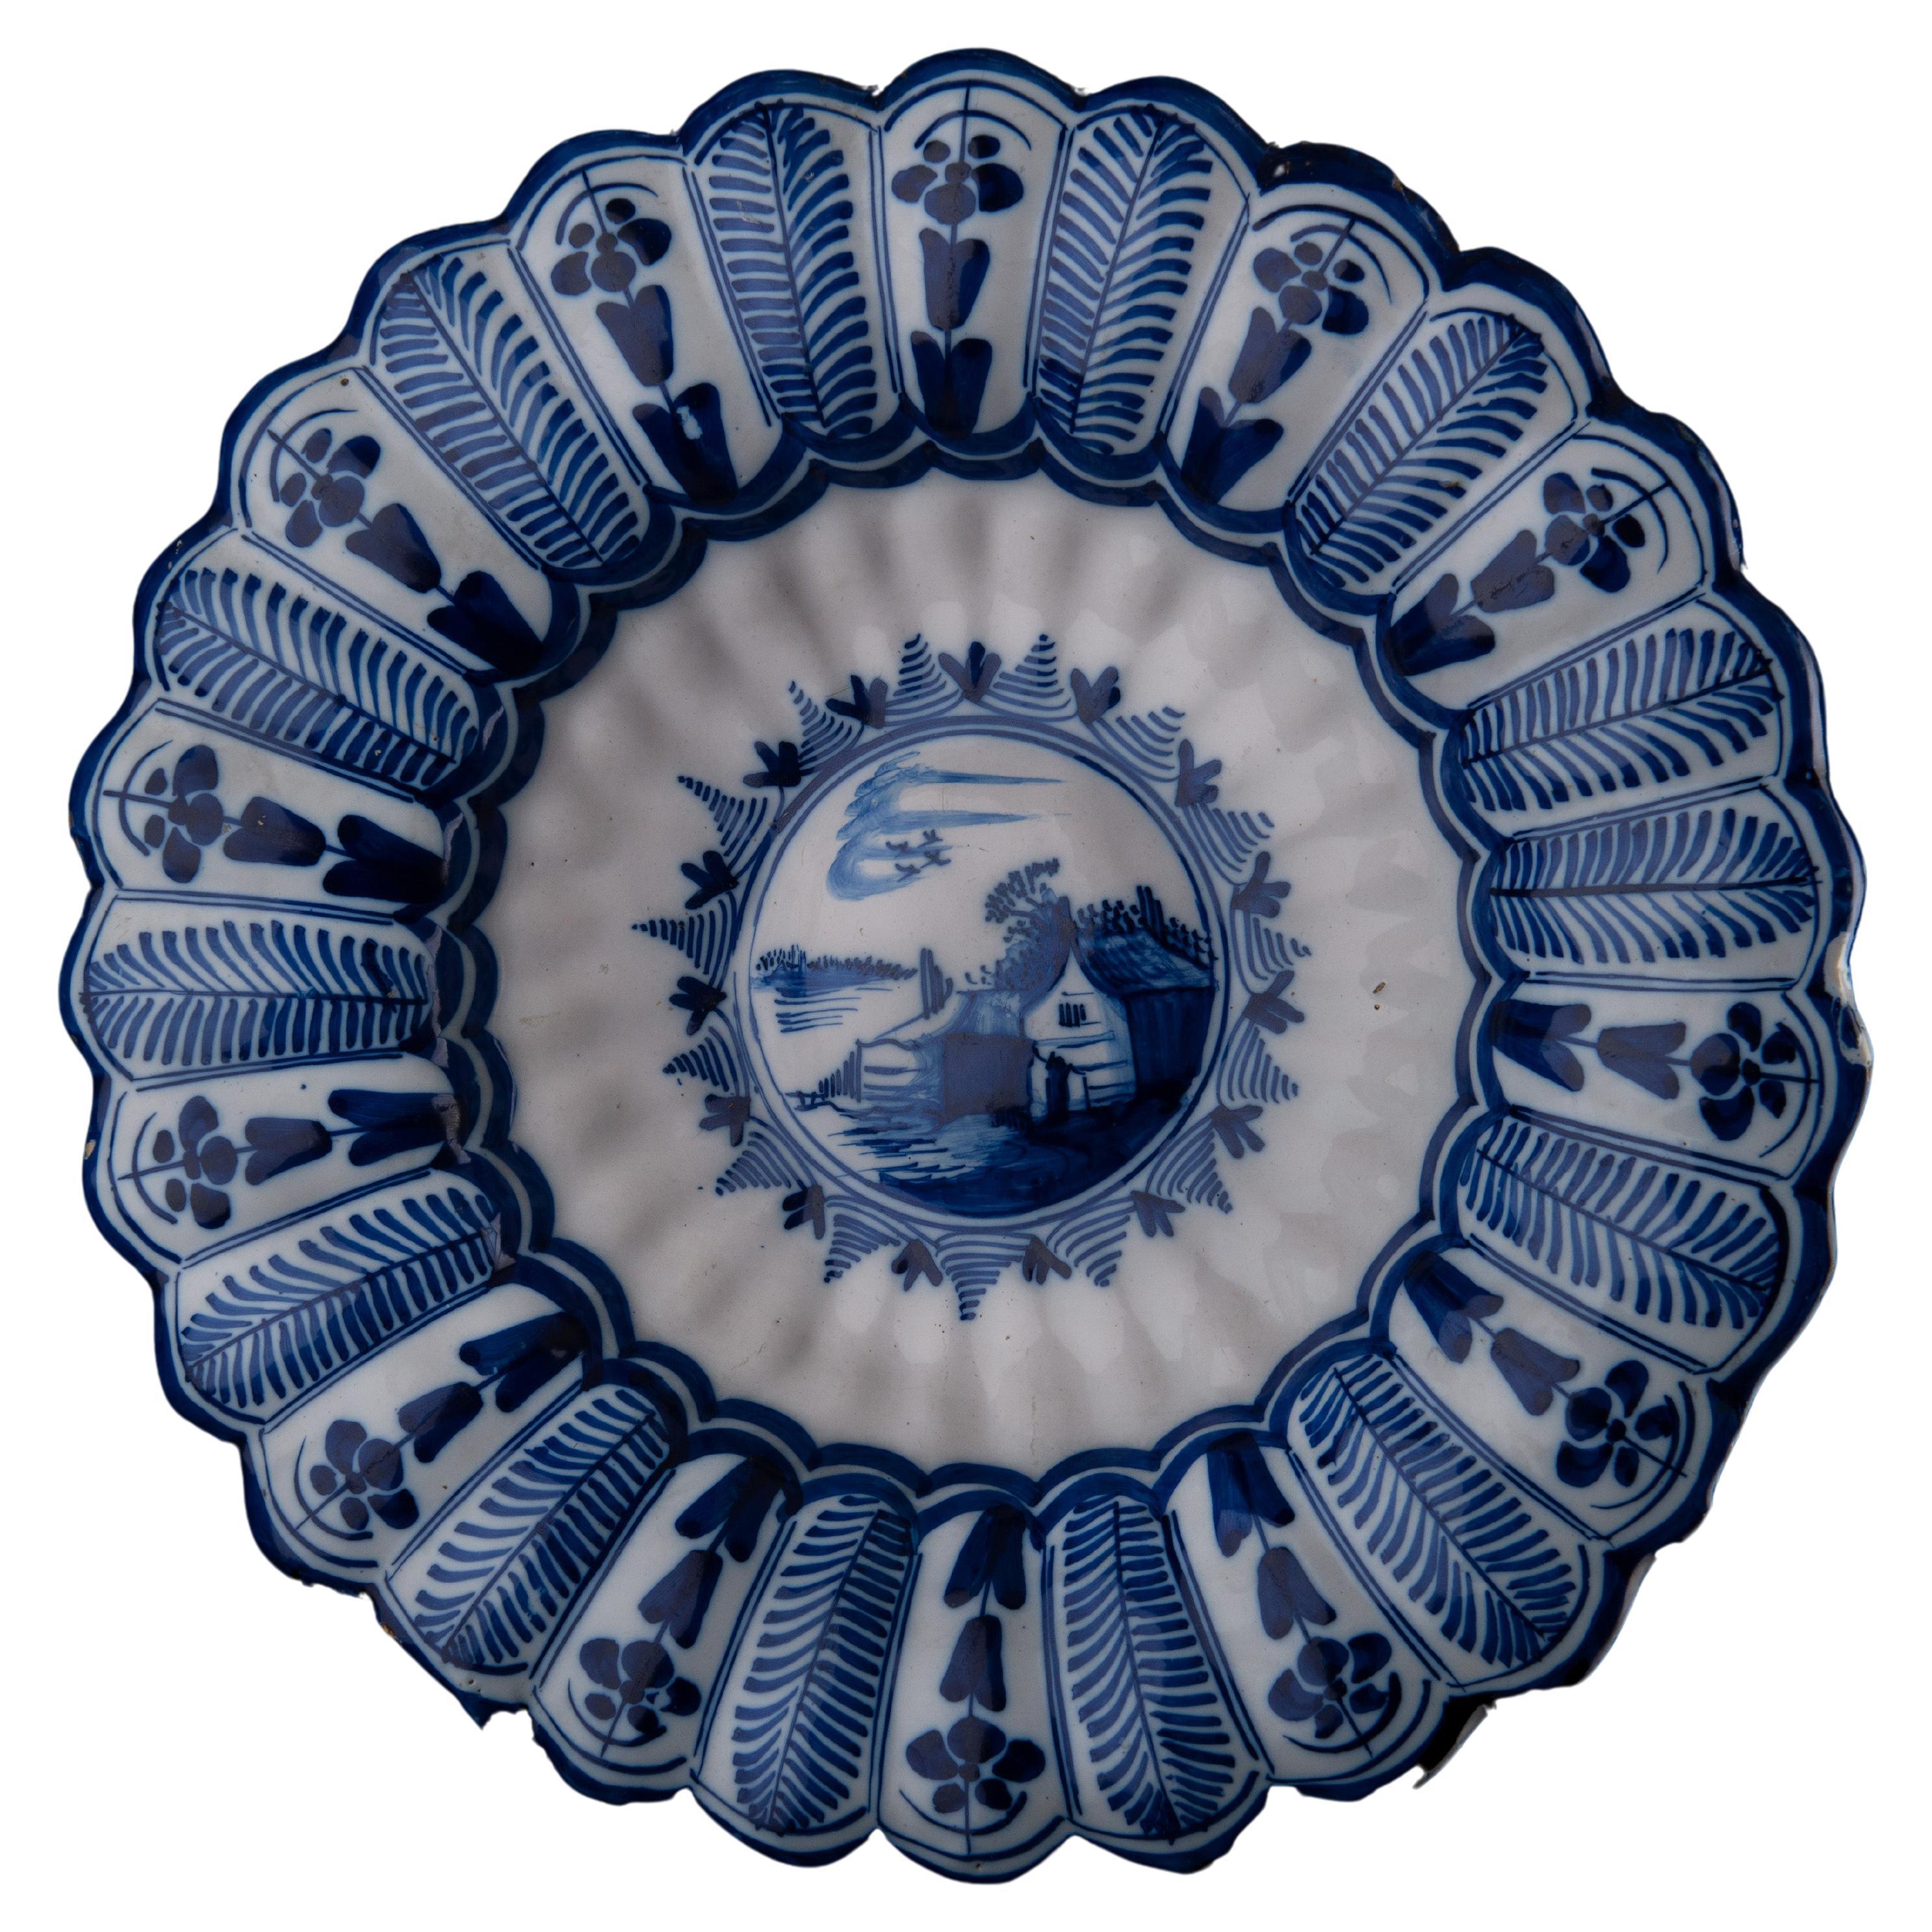 Delft Blue and White Lobed Dish with Landscape, Northern Netherlands, 1650-1680